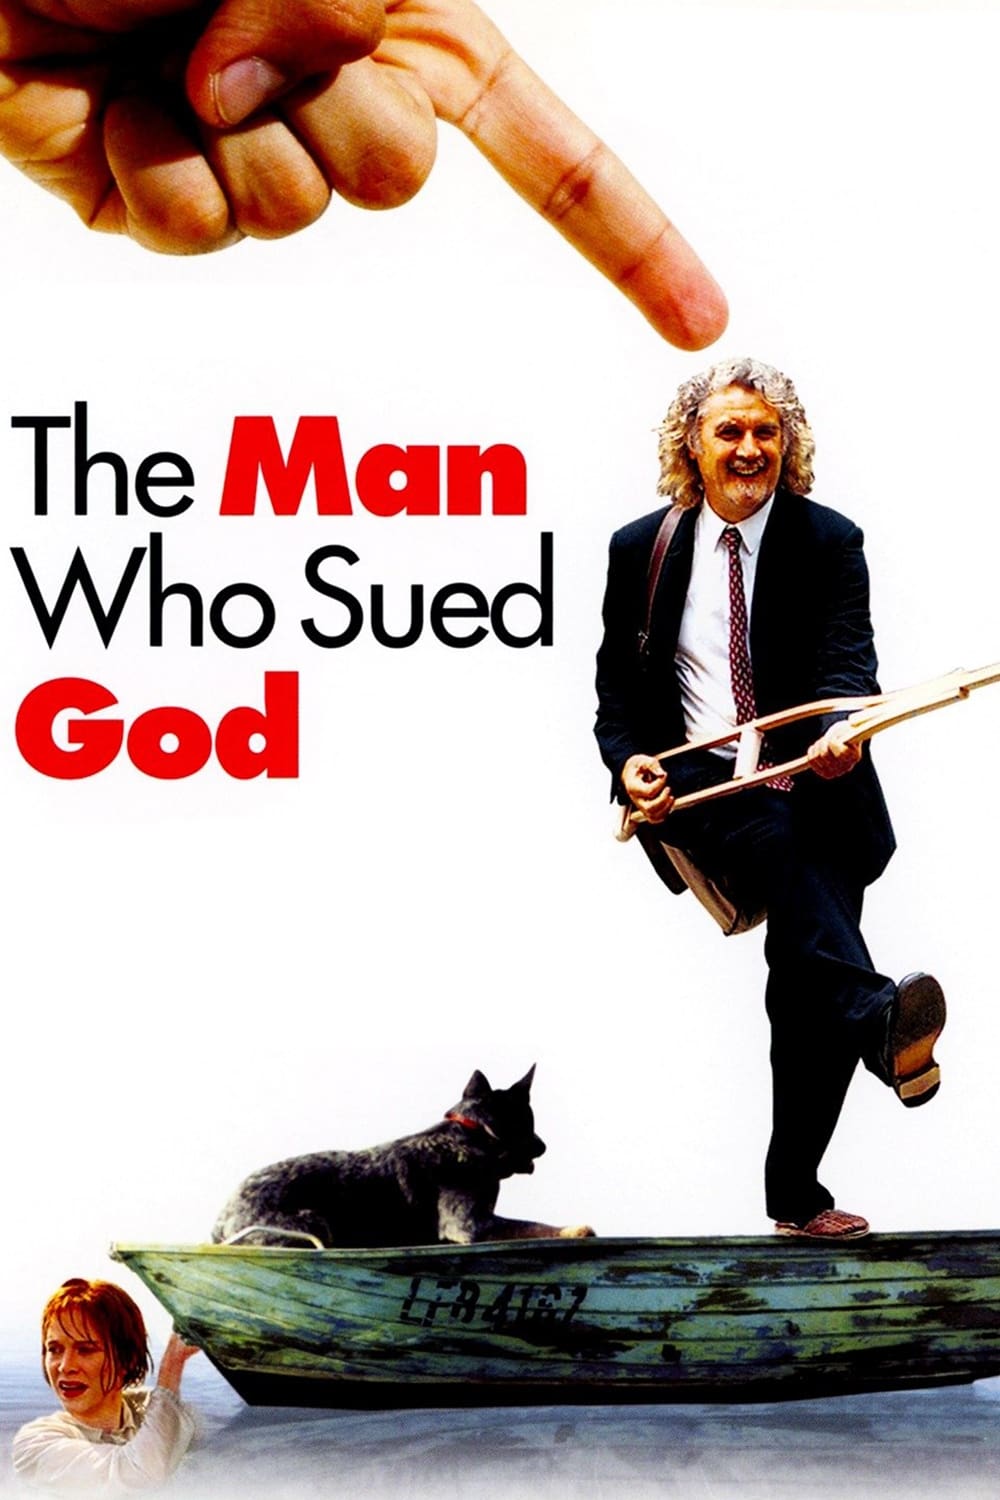 The Man Who Sued God film